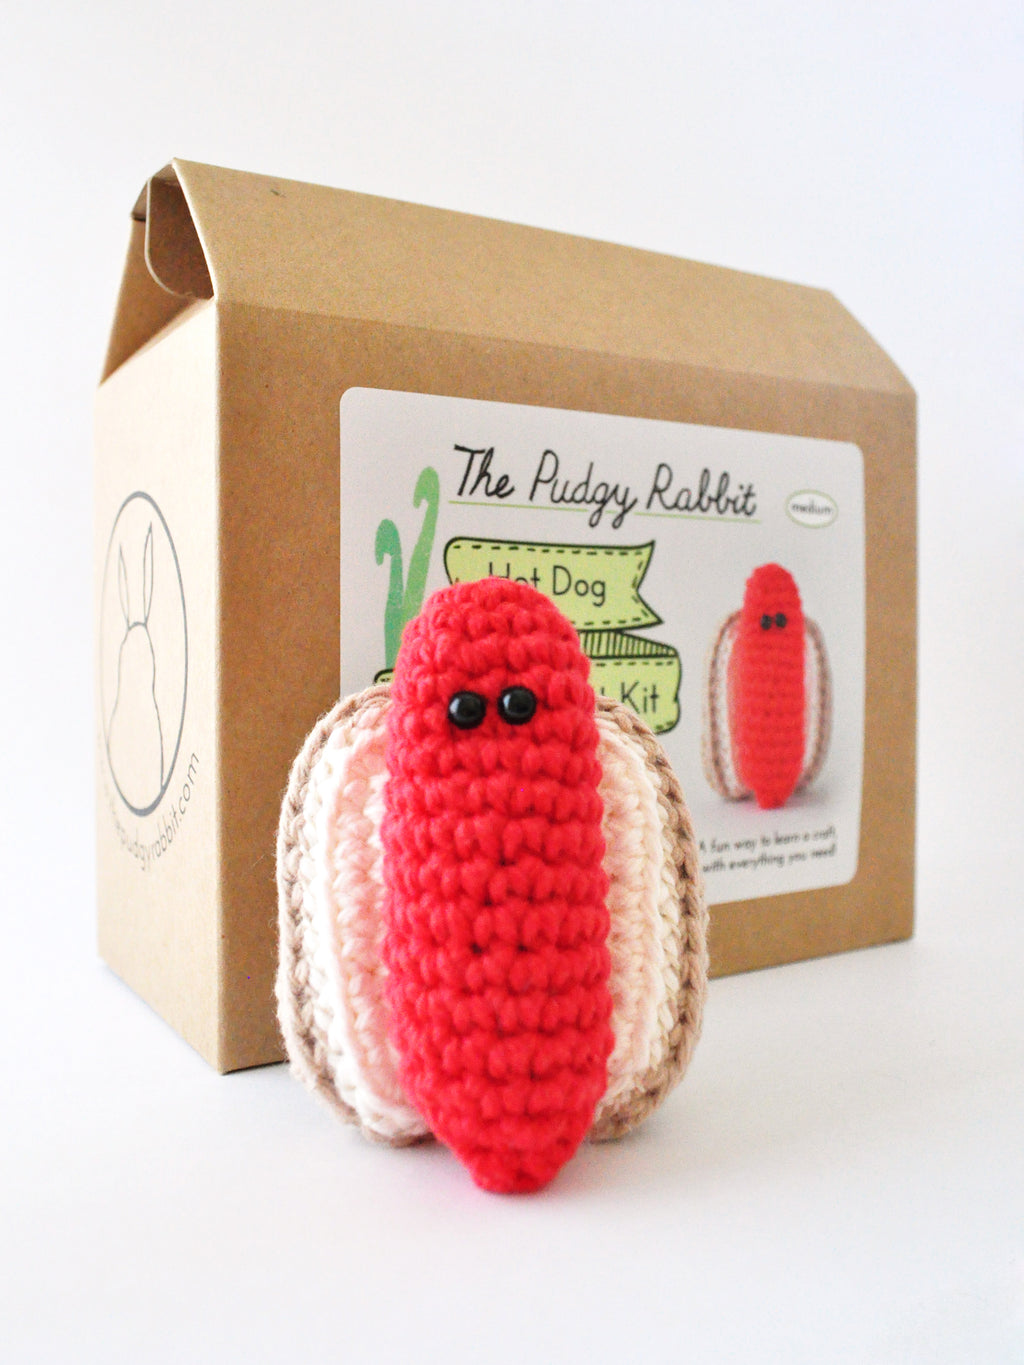 Hot dog crochet kit with all the supplies included